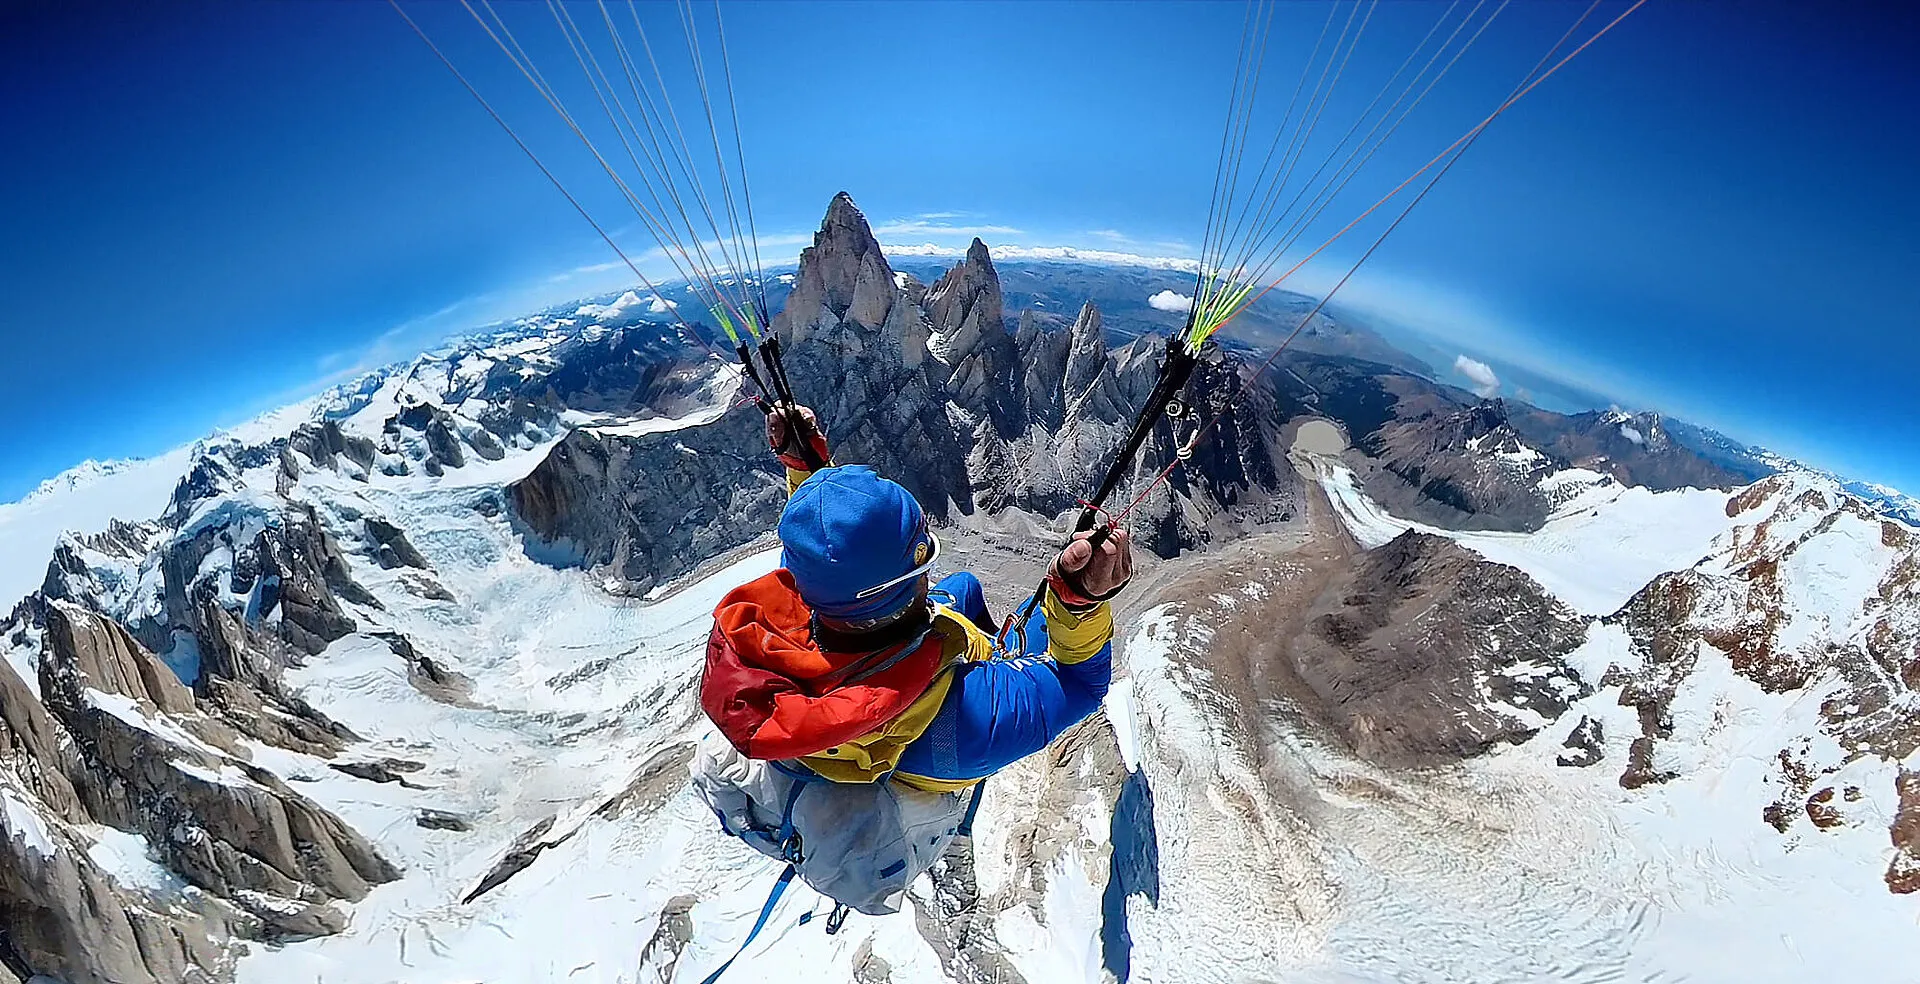 Cerro Torre in Argentina, South America | Mountains,Ice Climbing,Climbing - Rated 1.3